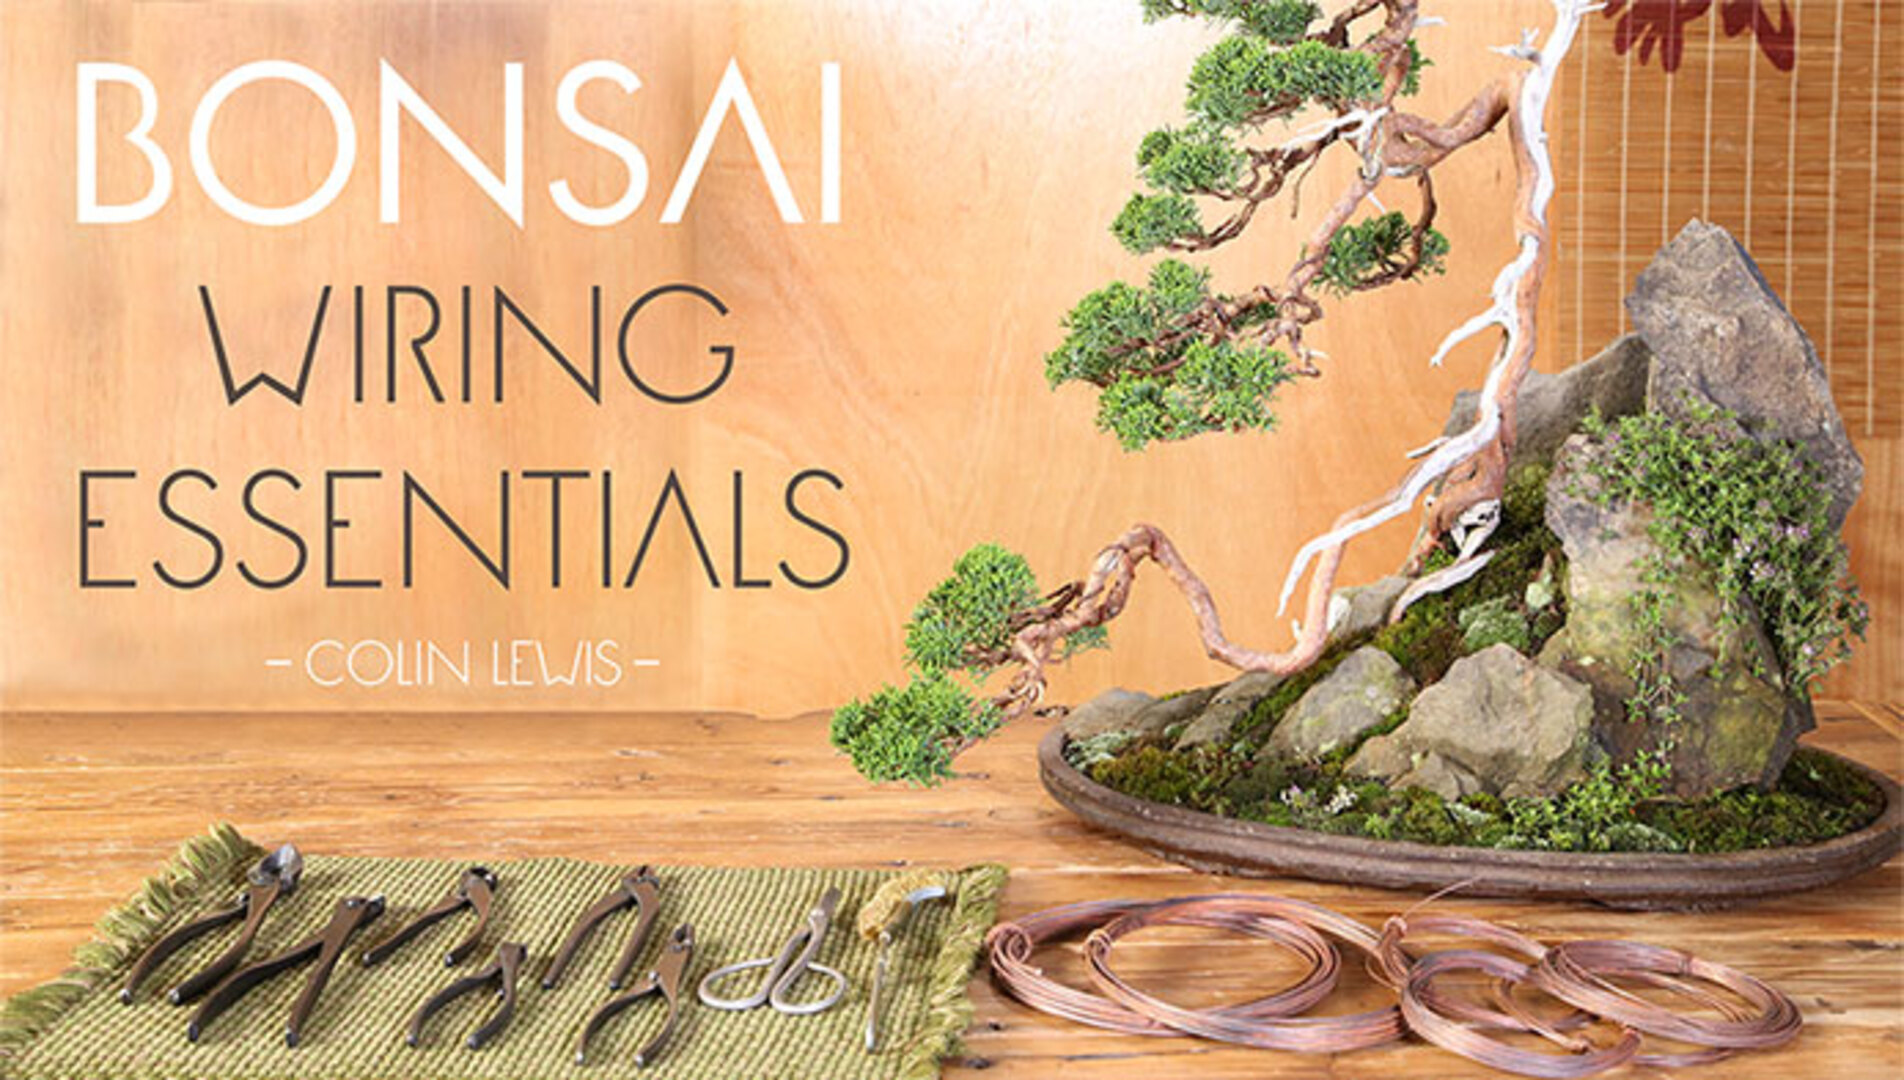 6 Easy Steps to Wire Bonsai Trees